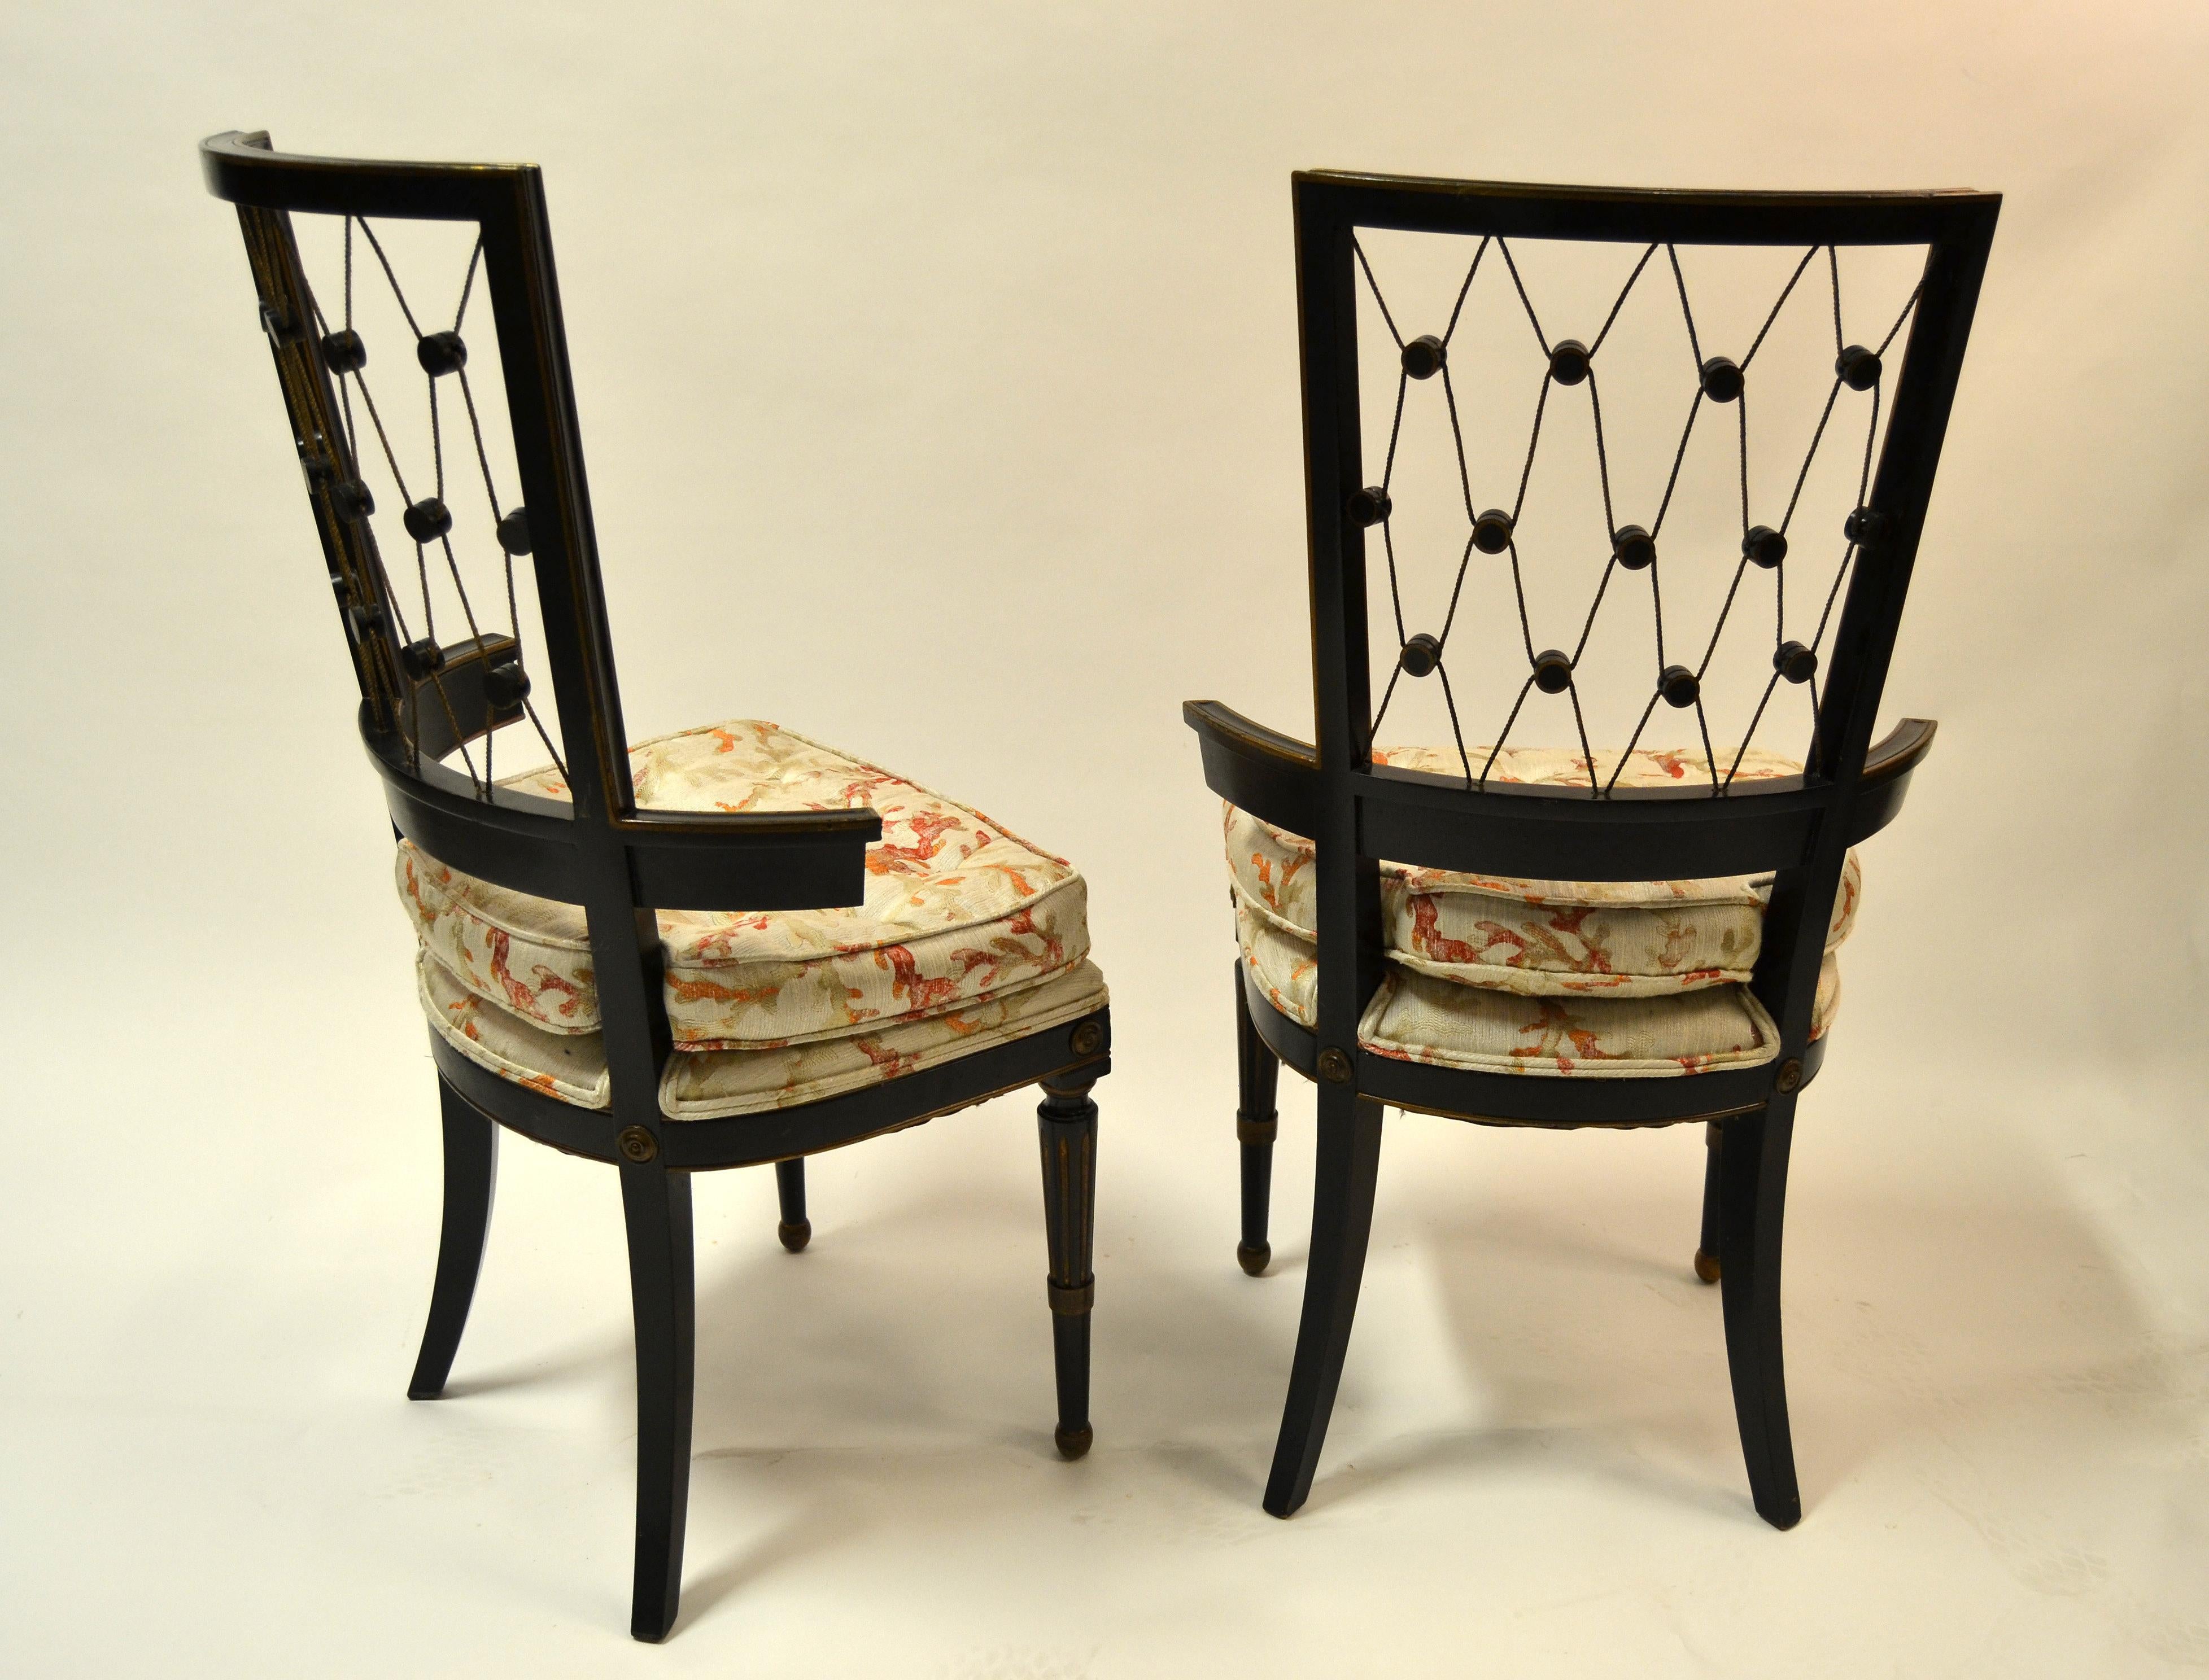 Mid-20th Century 1940s American Side Chairs Intricate Diamond Pattern Back Black and Gold - Pair For Sale